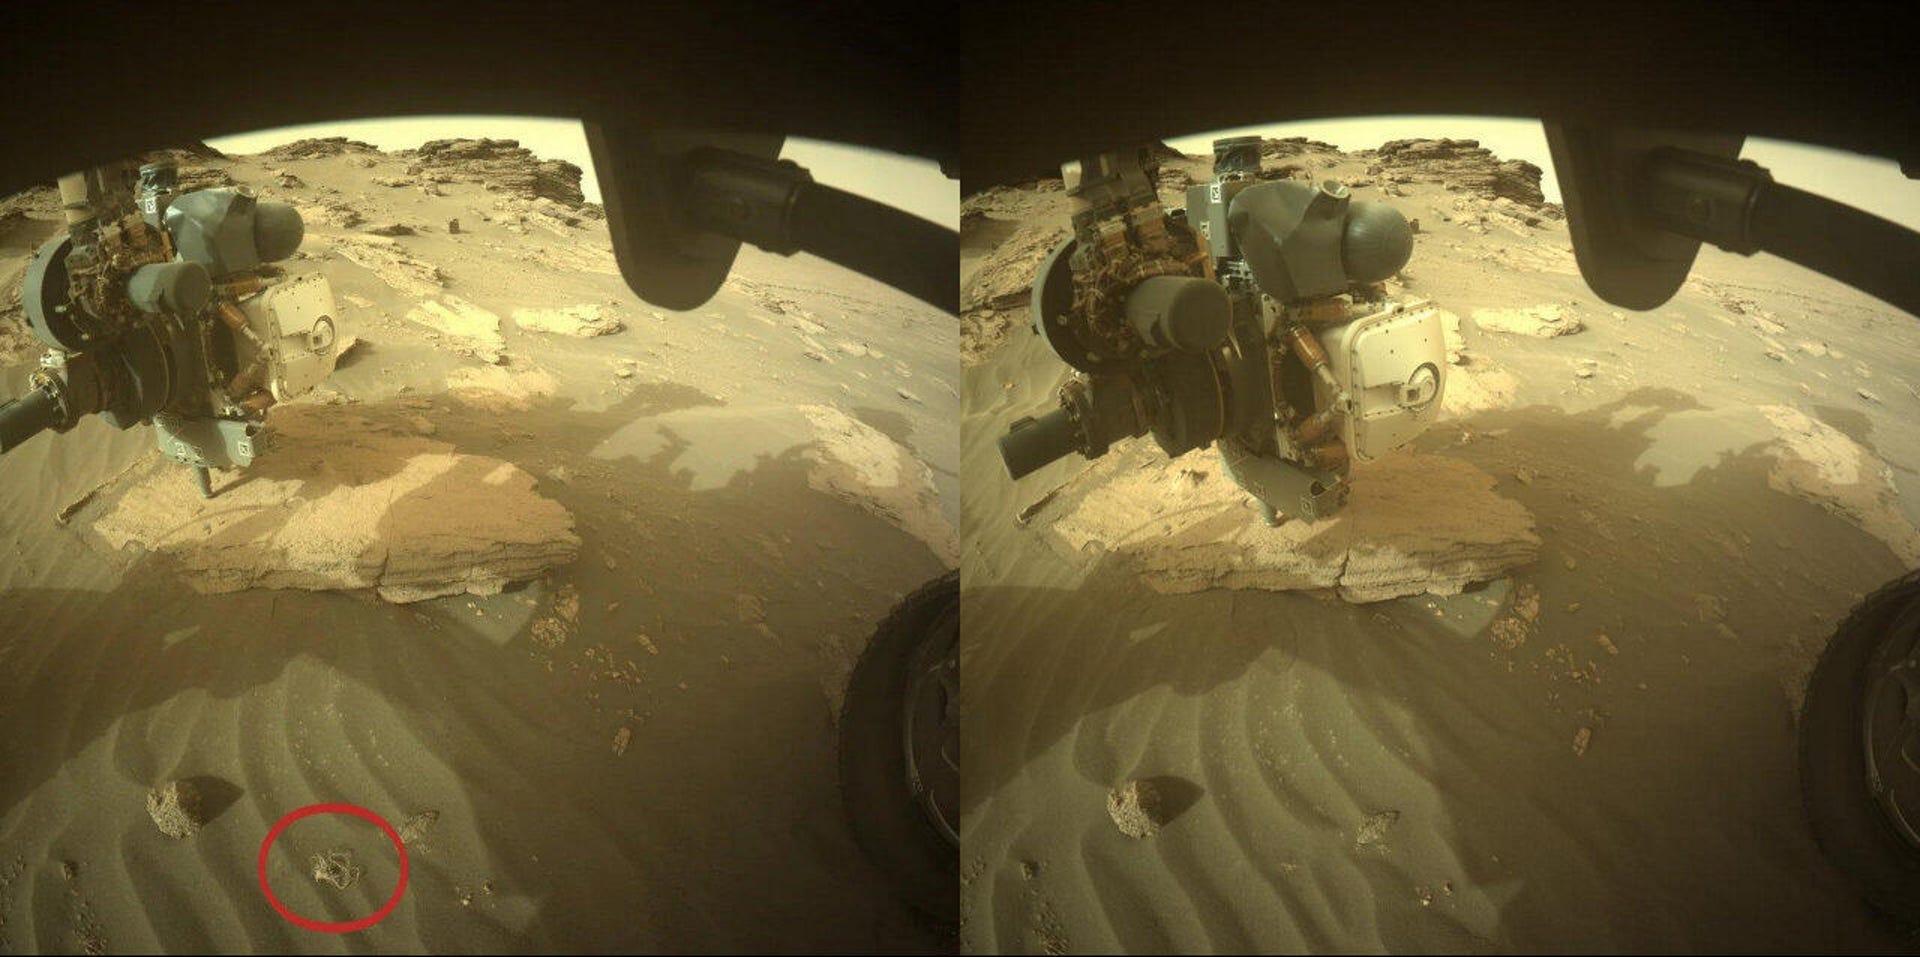 Two views of Mars seen by Perseverance. A string-like object is see in one and missing in the other.